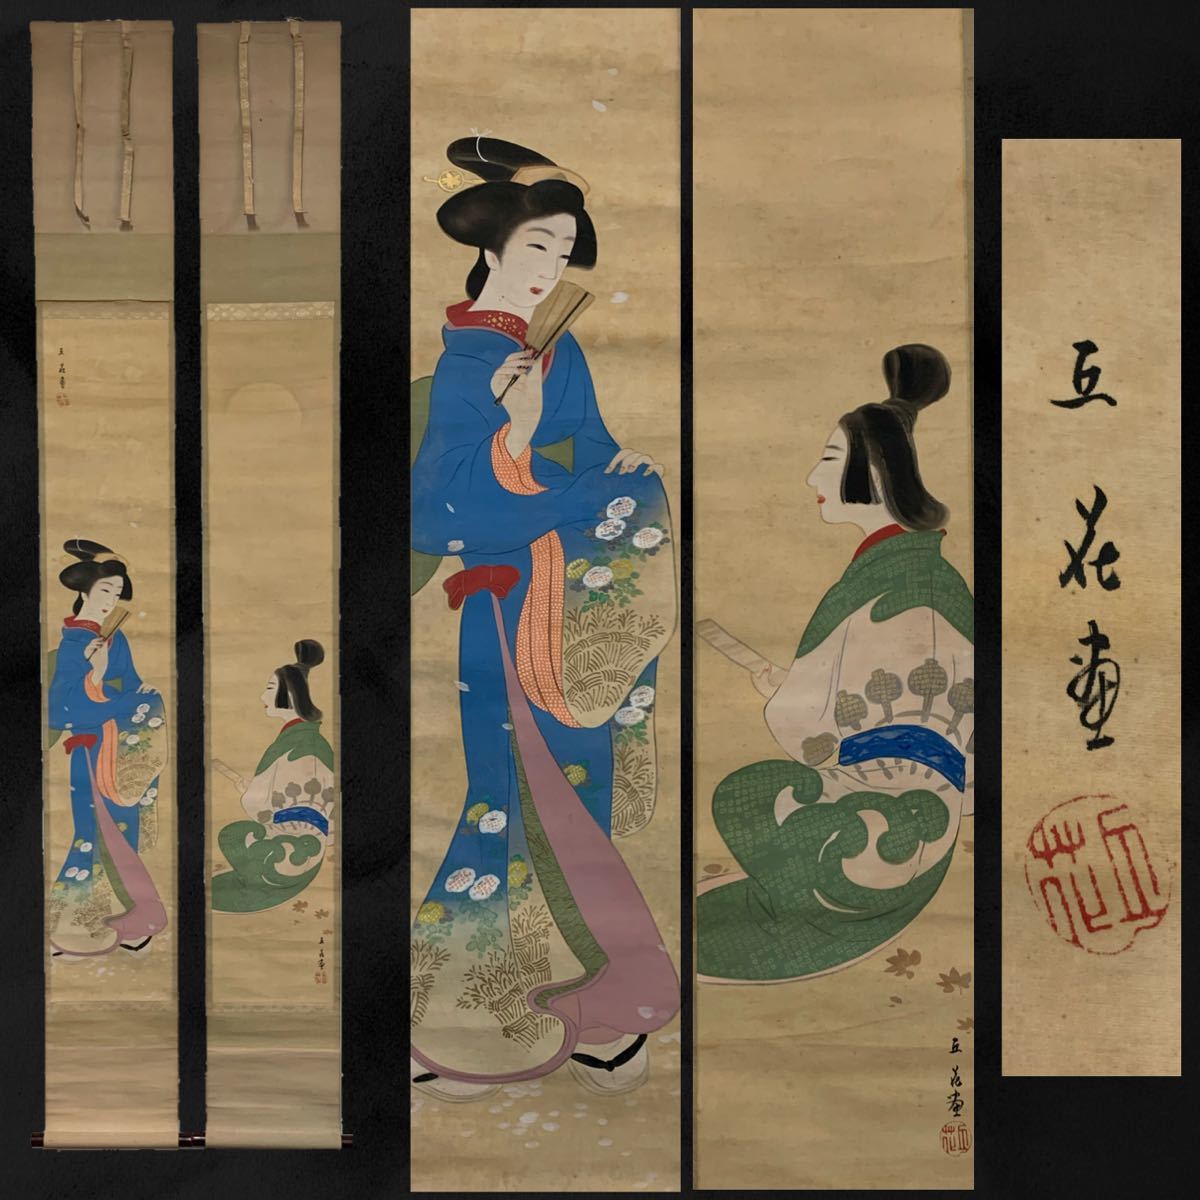 [Reproduction] (Rin 90) Goka, Beautiful Woman, Pair of Scrolls, Silk, Box, Approx. 206 x 25.5 cm, Period, Antique, Ancient Art, Painting, Japanese painting, person, Bodhisattva